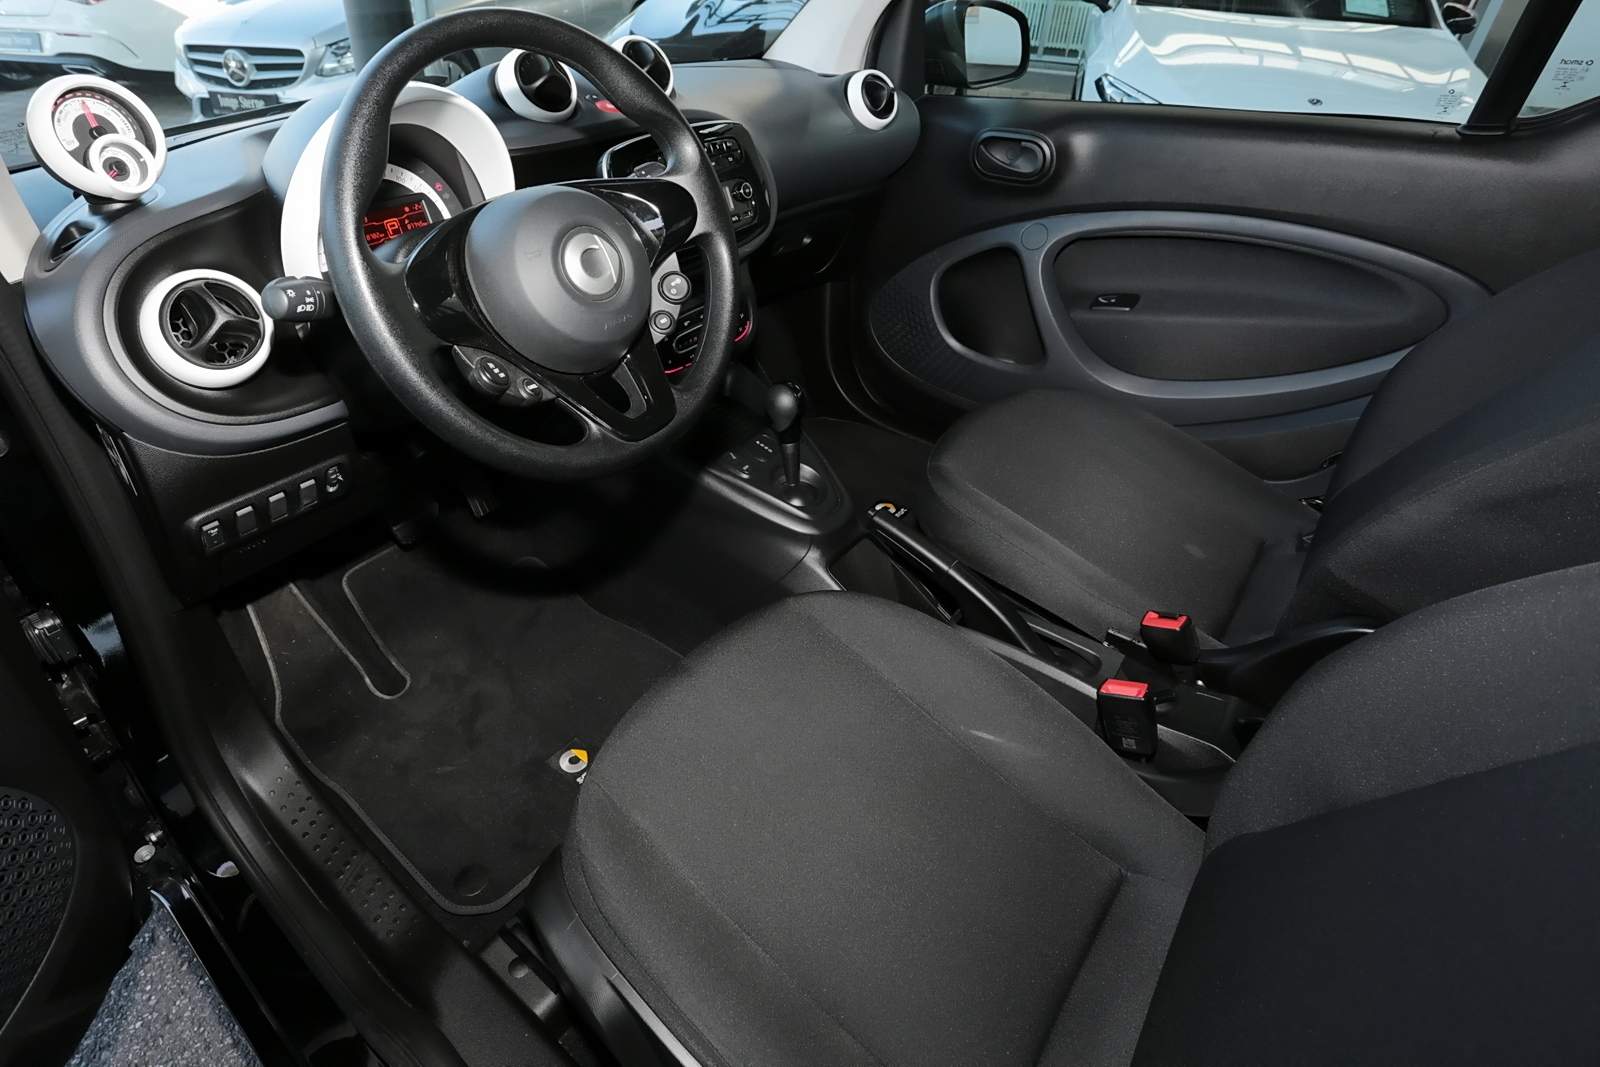 Smart ForTwo EQ Tempomat+Sidebags+Cool+Audio+Plus-Pkt+ 